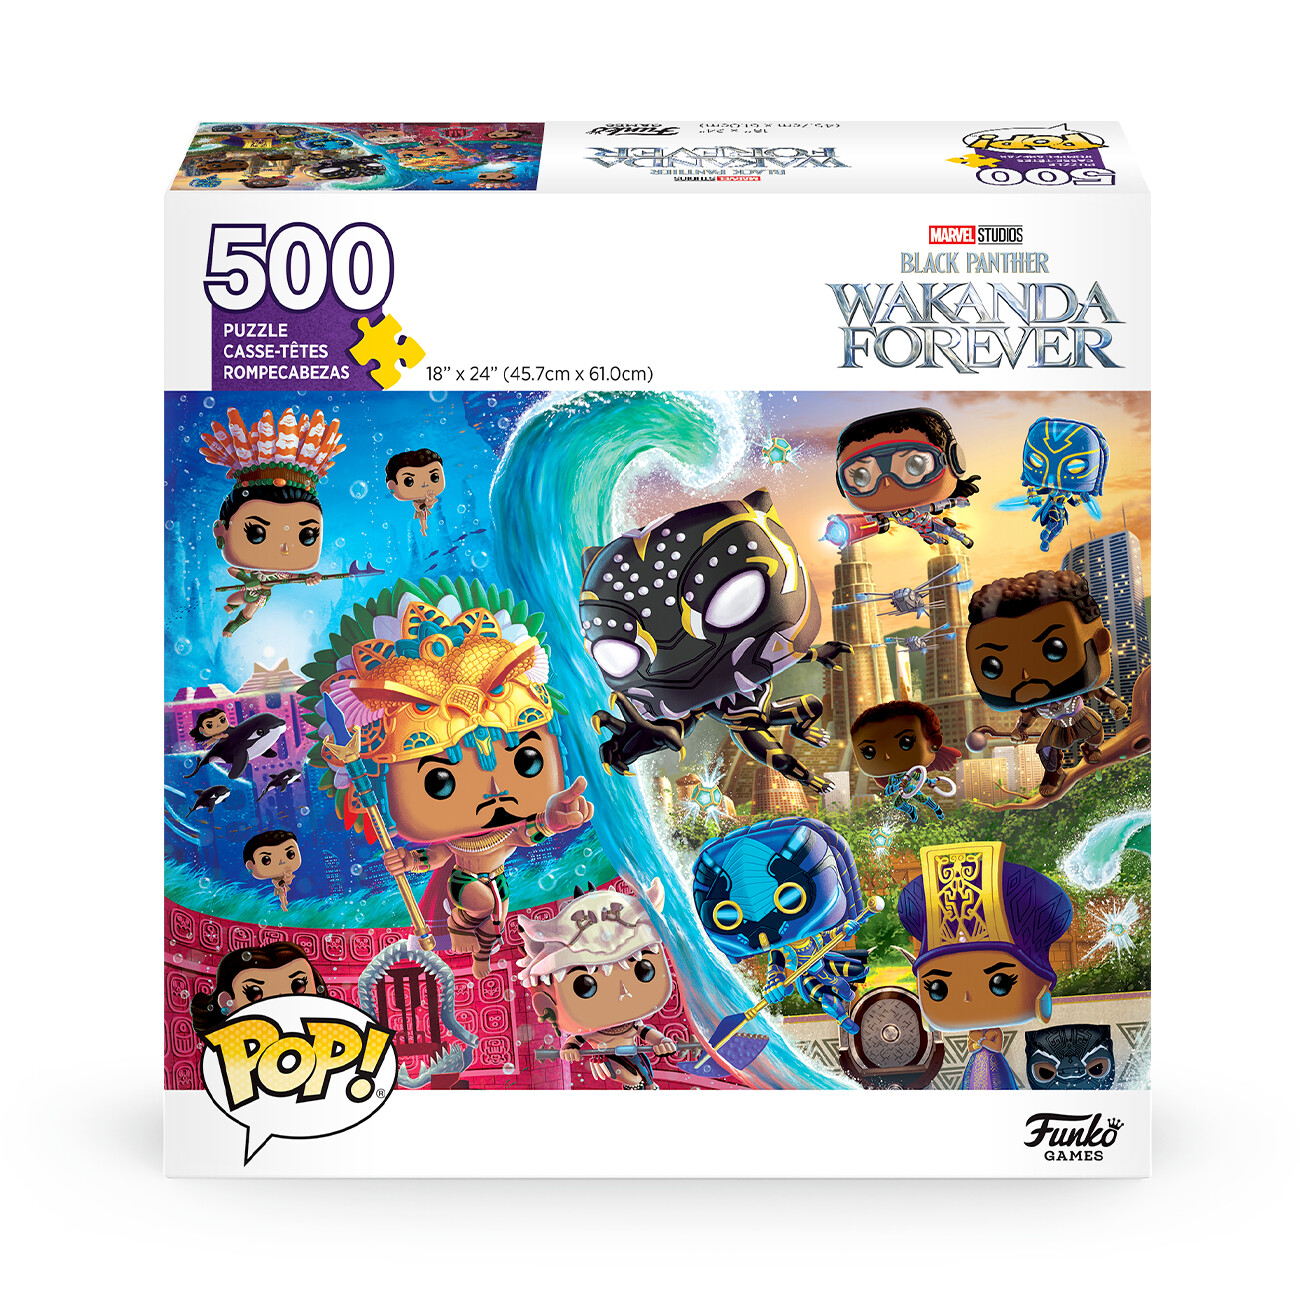  Marvel’s Black Panther: Wakanda Forever Puzzle - Funko Pop Games